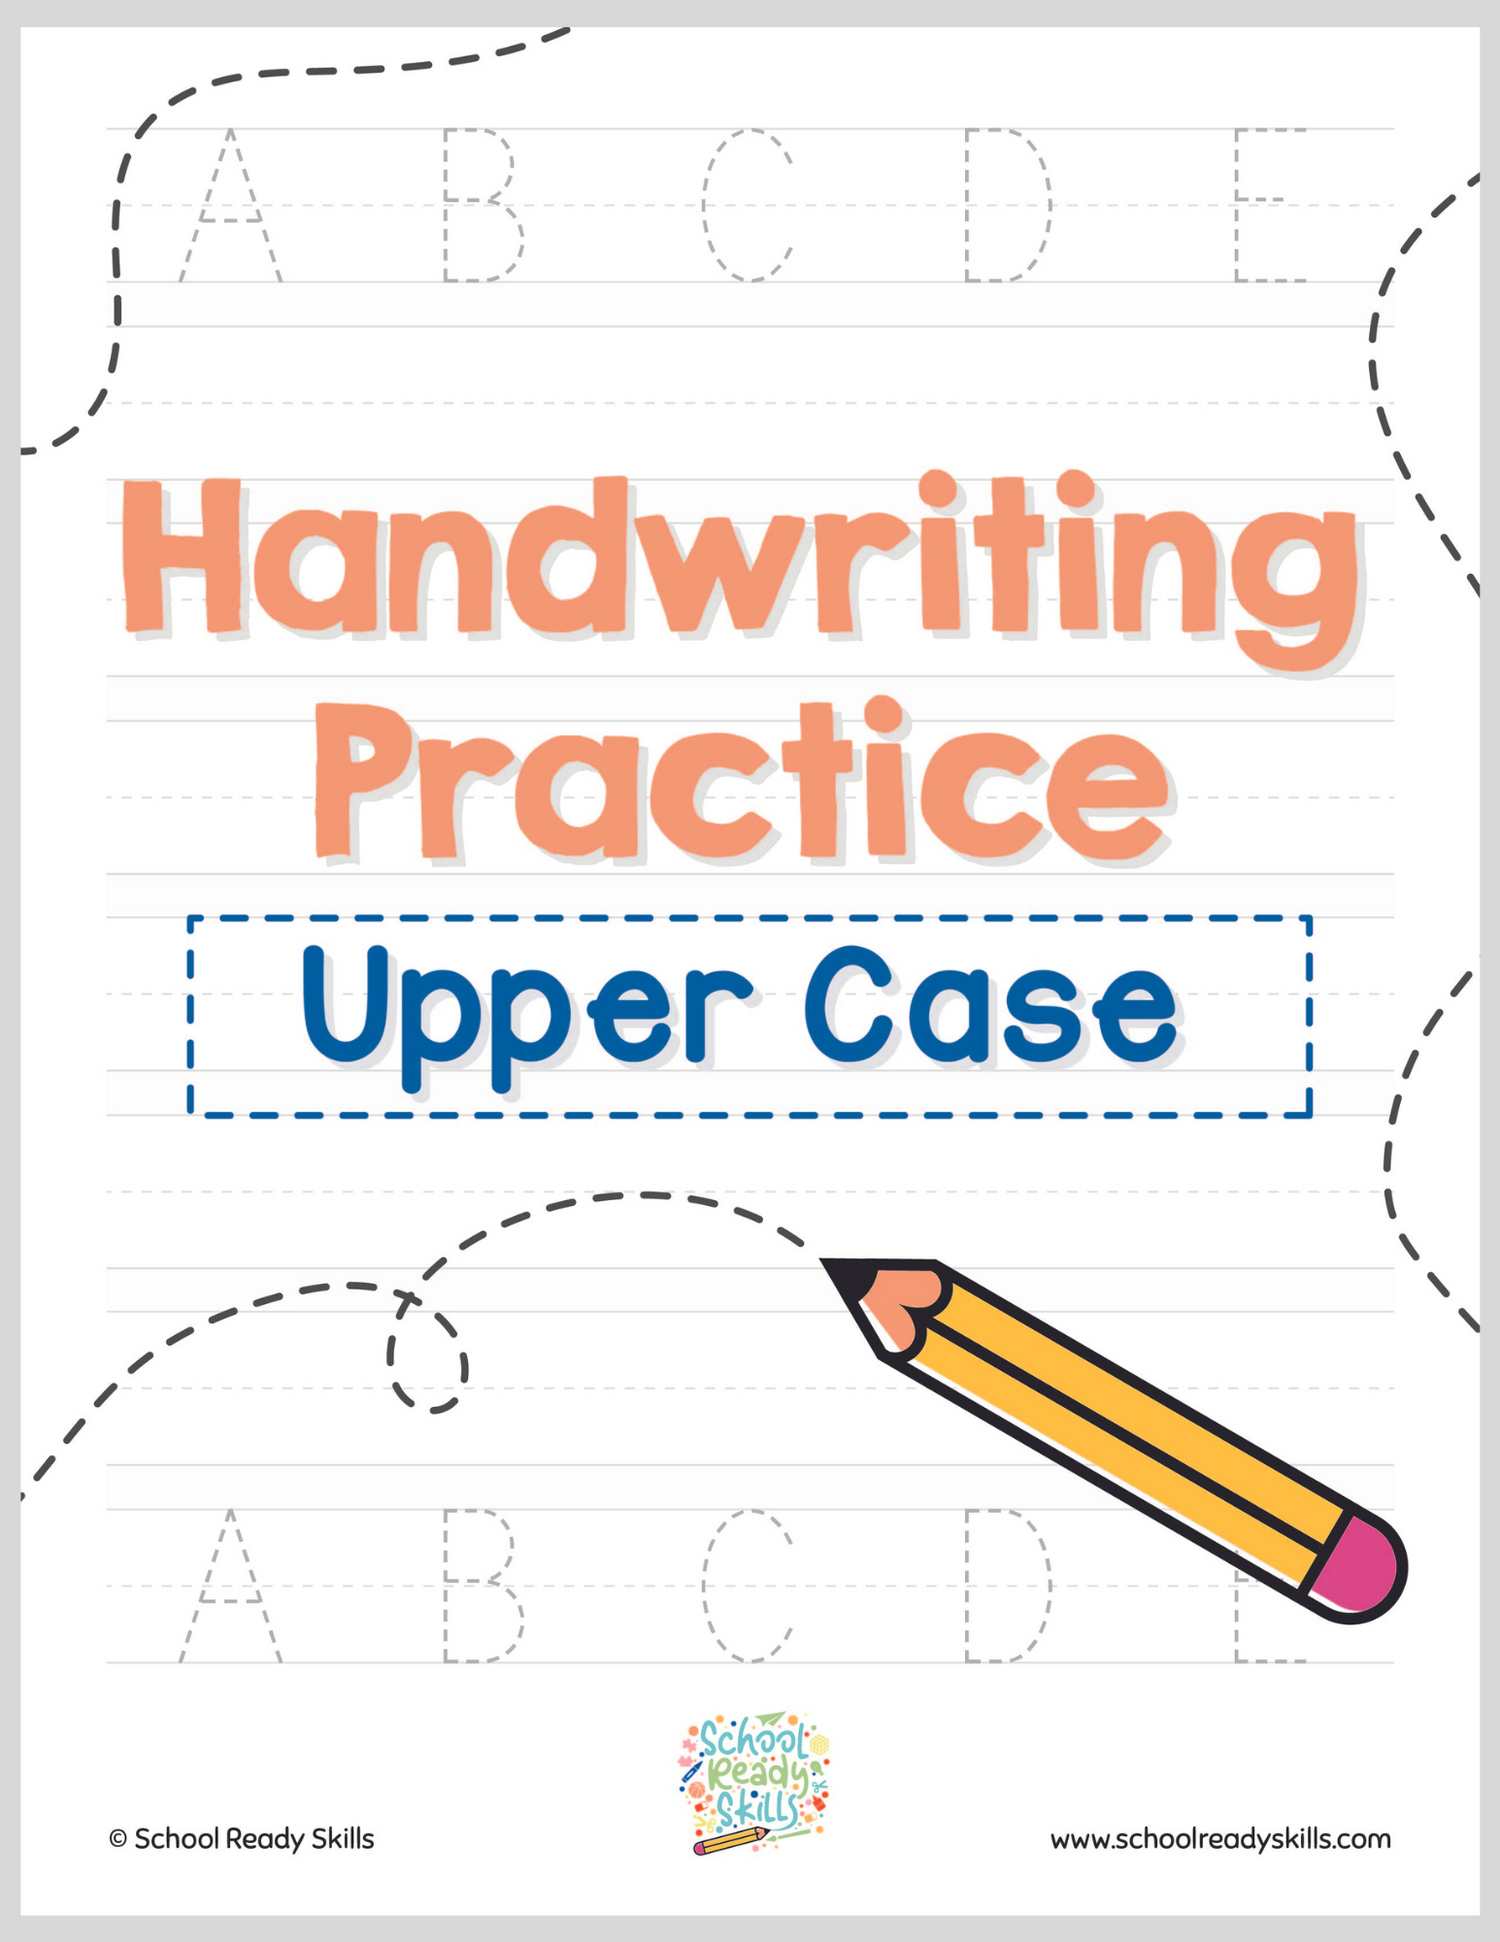 All In One Handwriting Workbook: Upper Case, Lower Case, and letters combined workbook